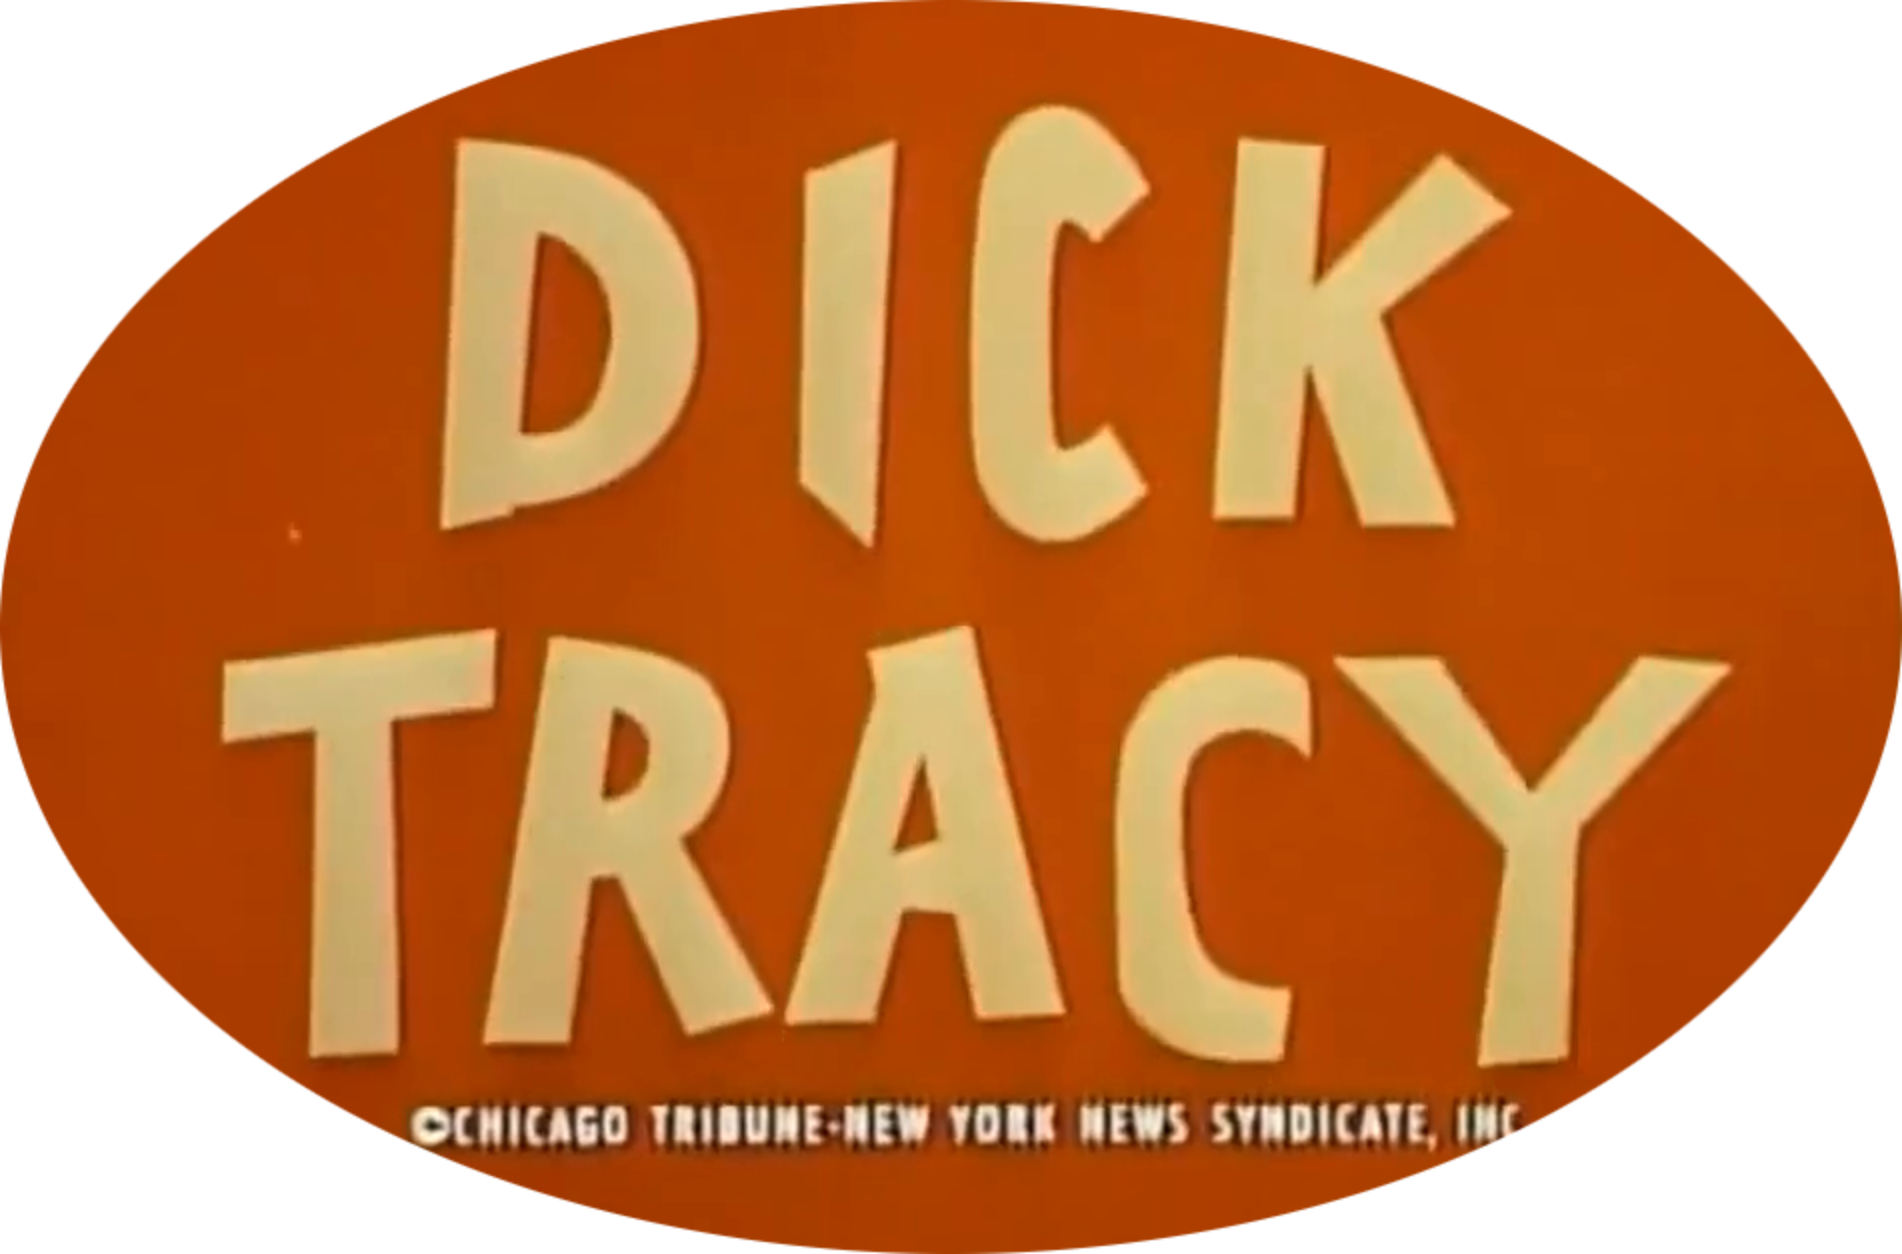 The Dick Tracy Show Complete 